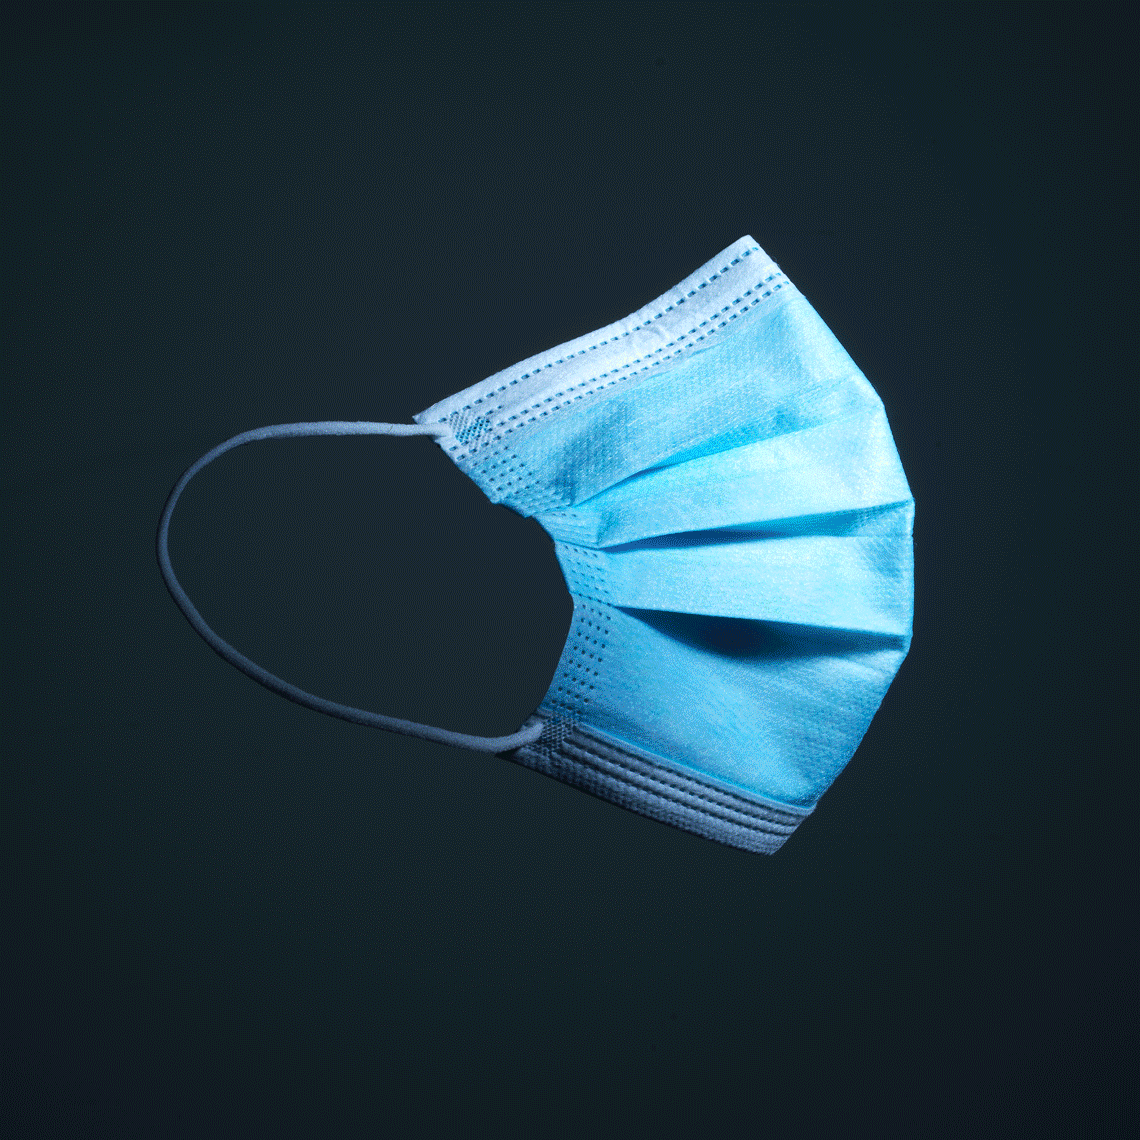 Covid Surgical Mask — Animated Still Life Photography